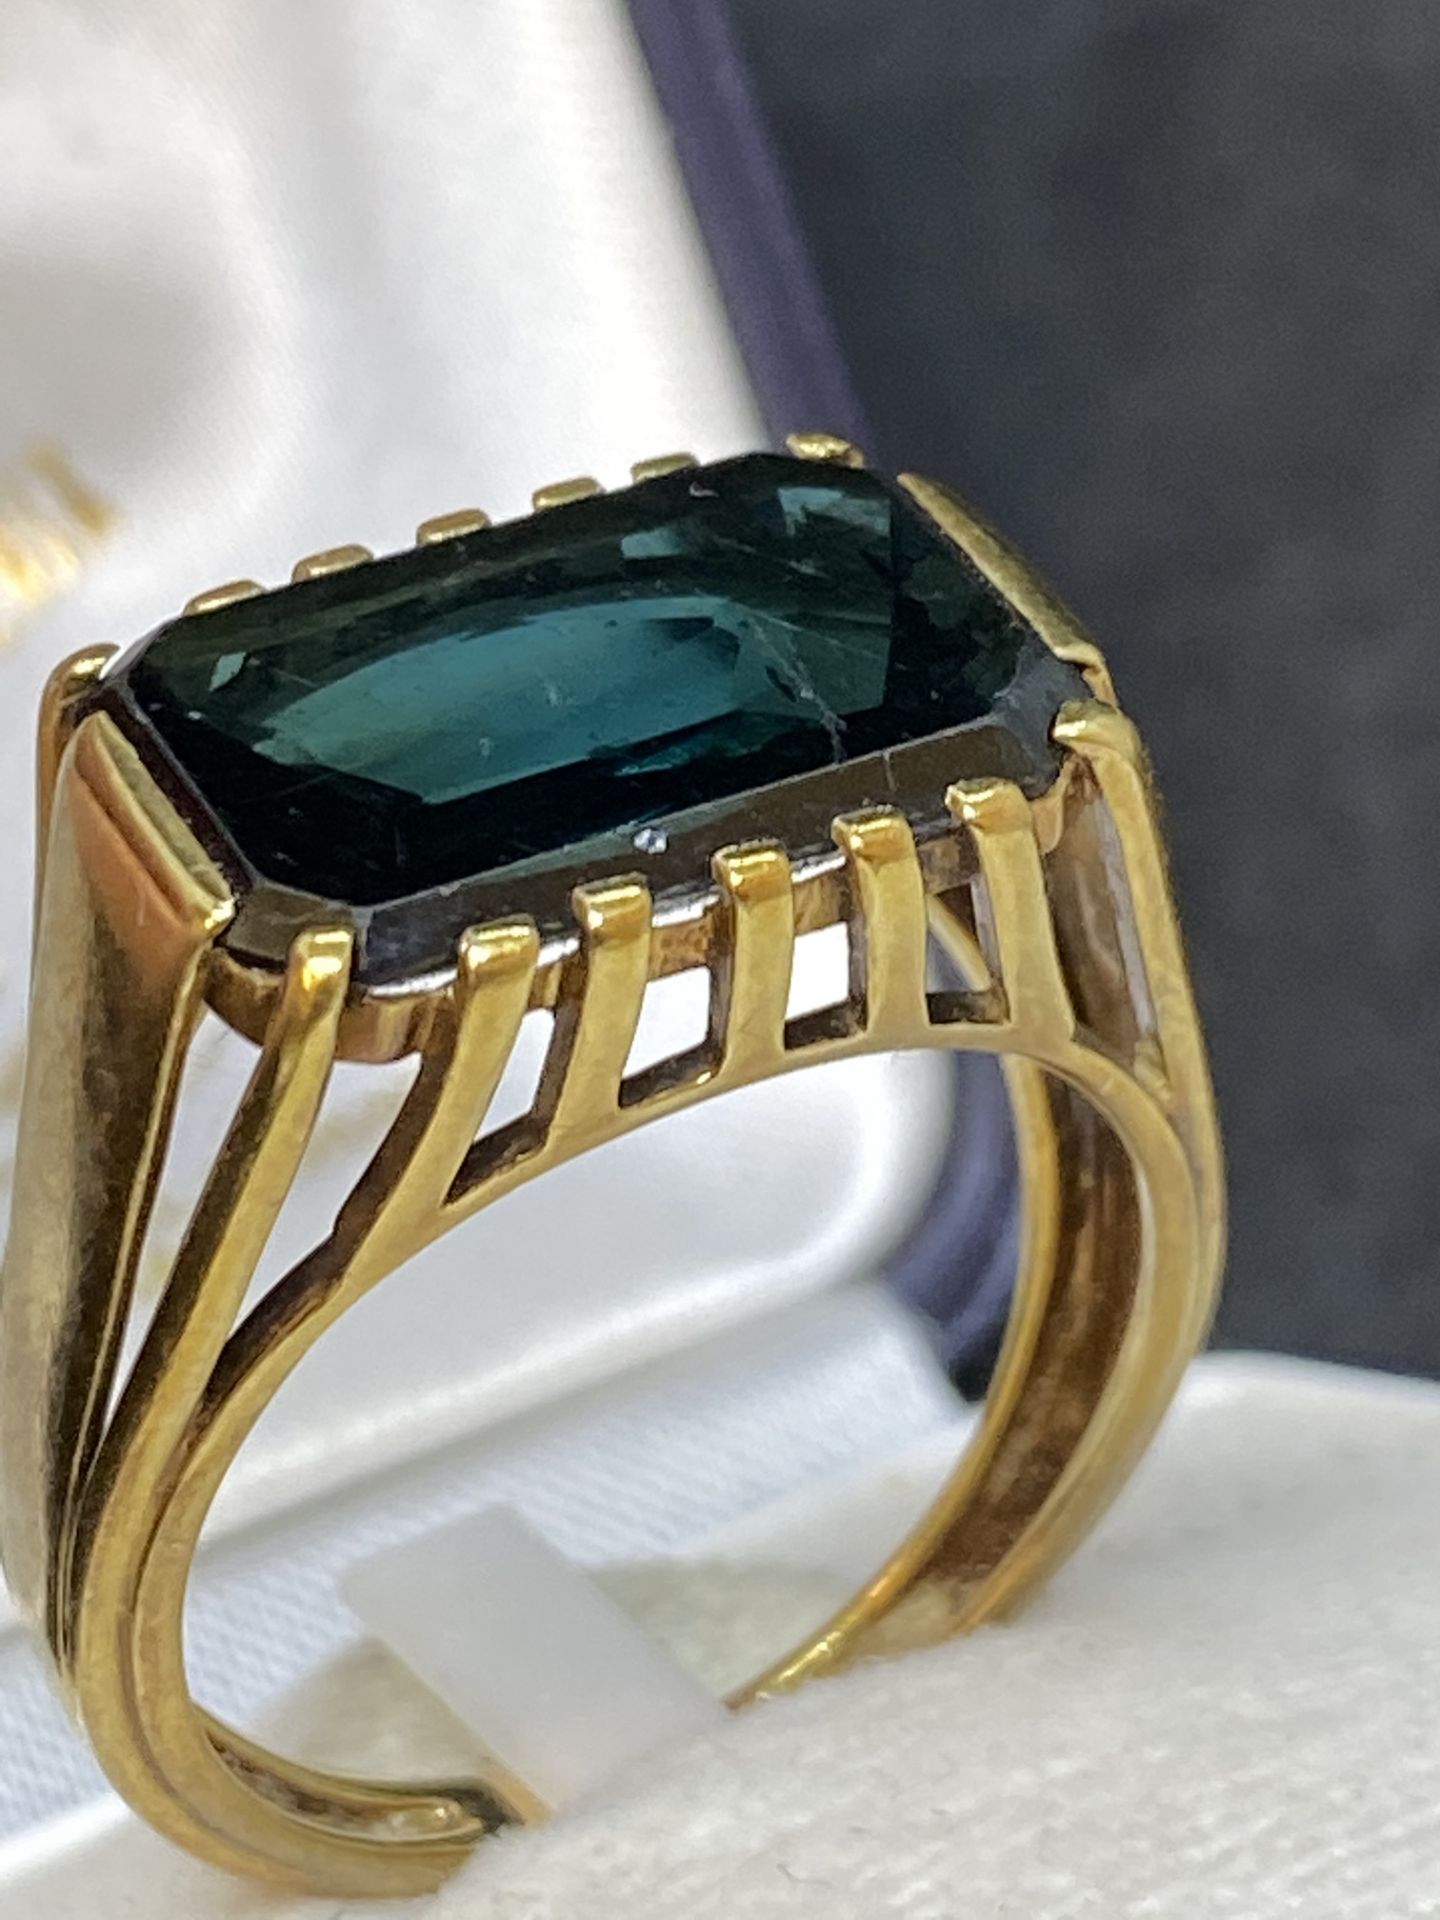 14k GOLD GENTS RING - 8 GRAMS - Image 2 of 5